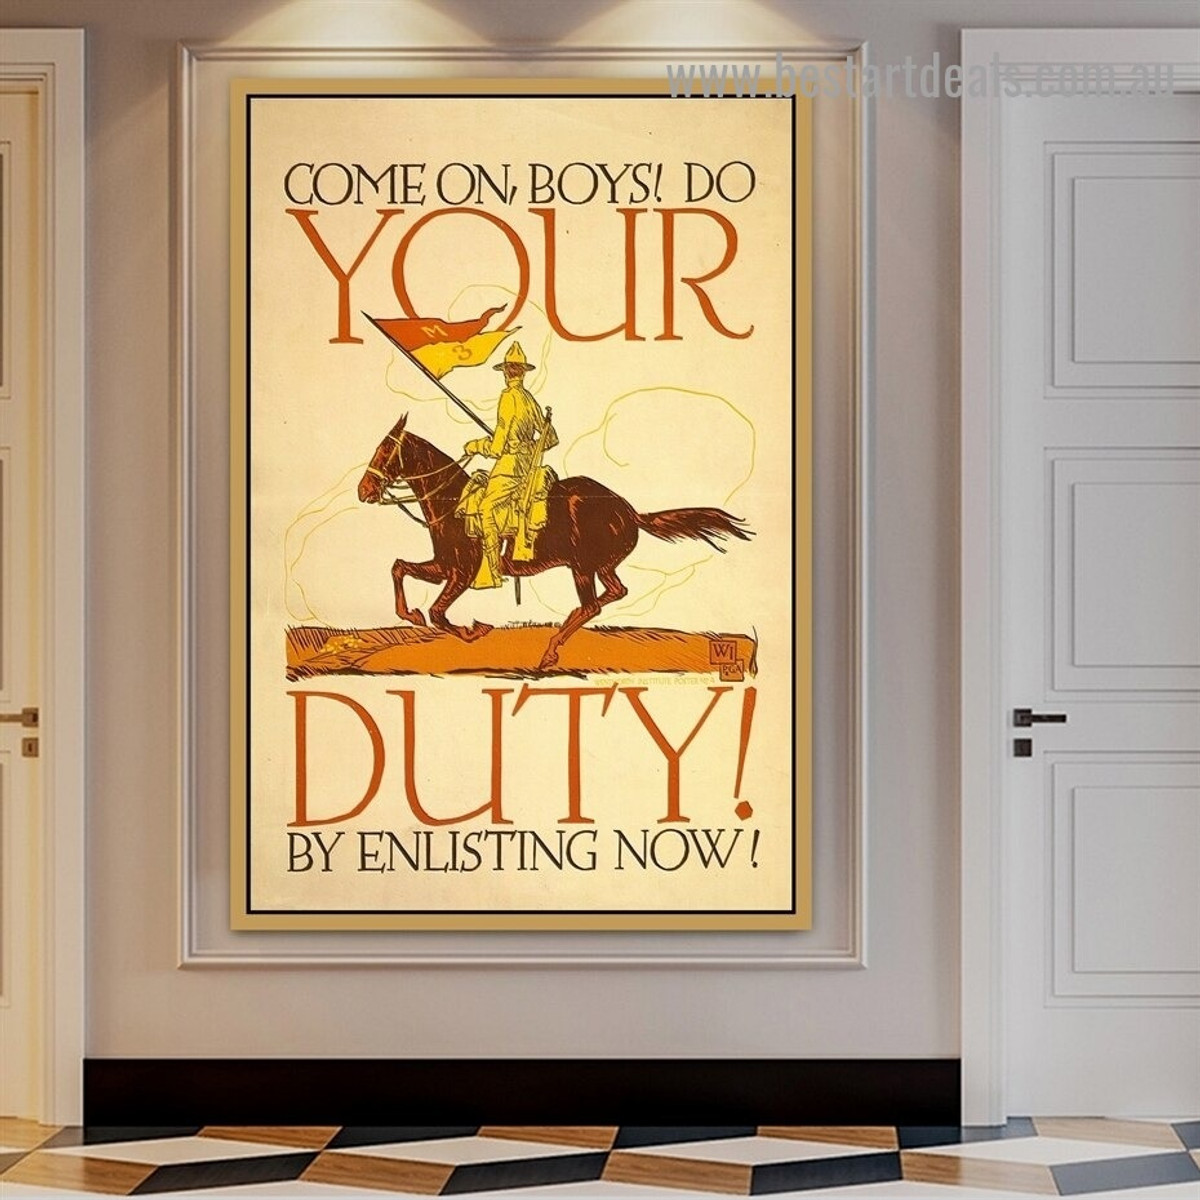 Come on Boys Do Your Duty by Enlisting Now Animal Figure Vintage Retro Advertisement Poster Artwork Photo Canvas Print for Room Wall Adornment